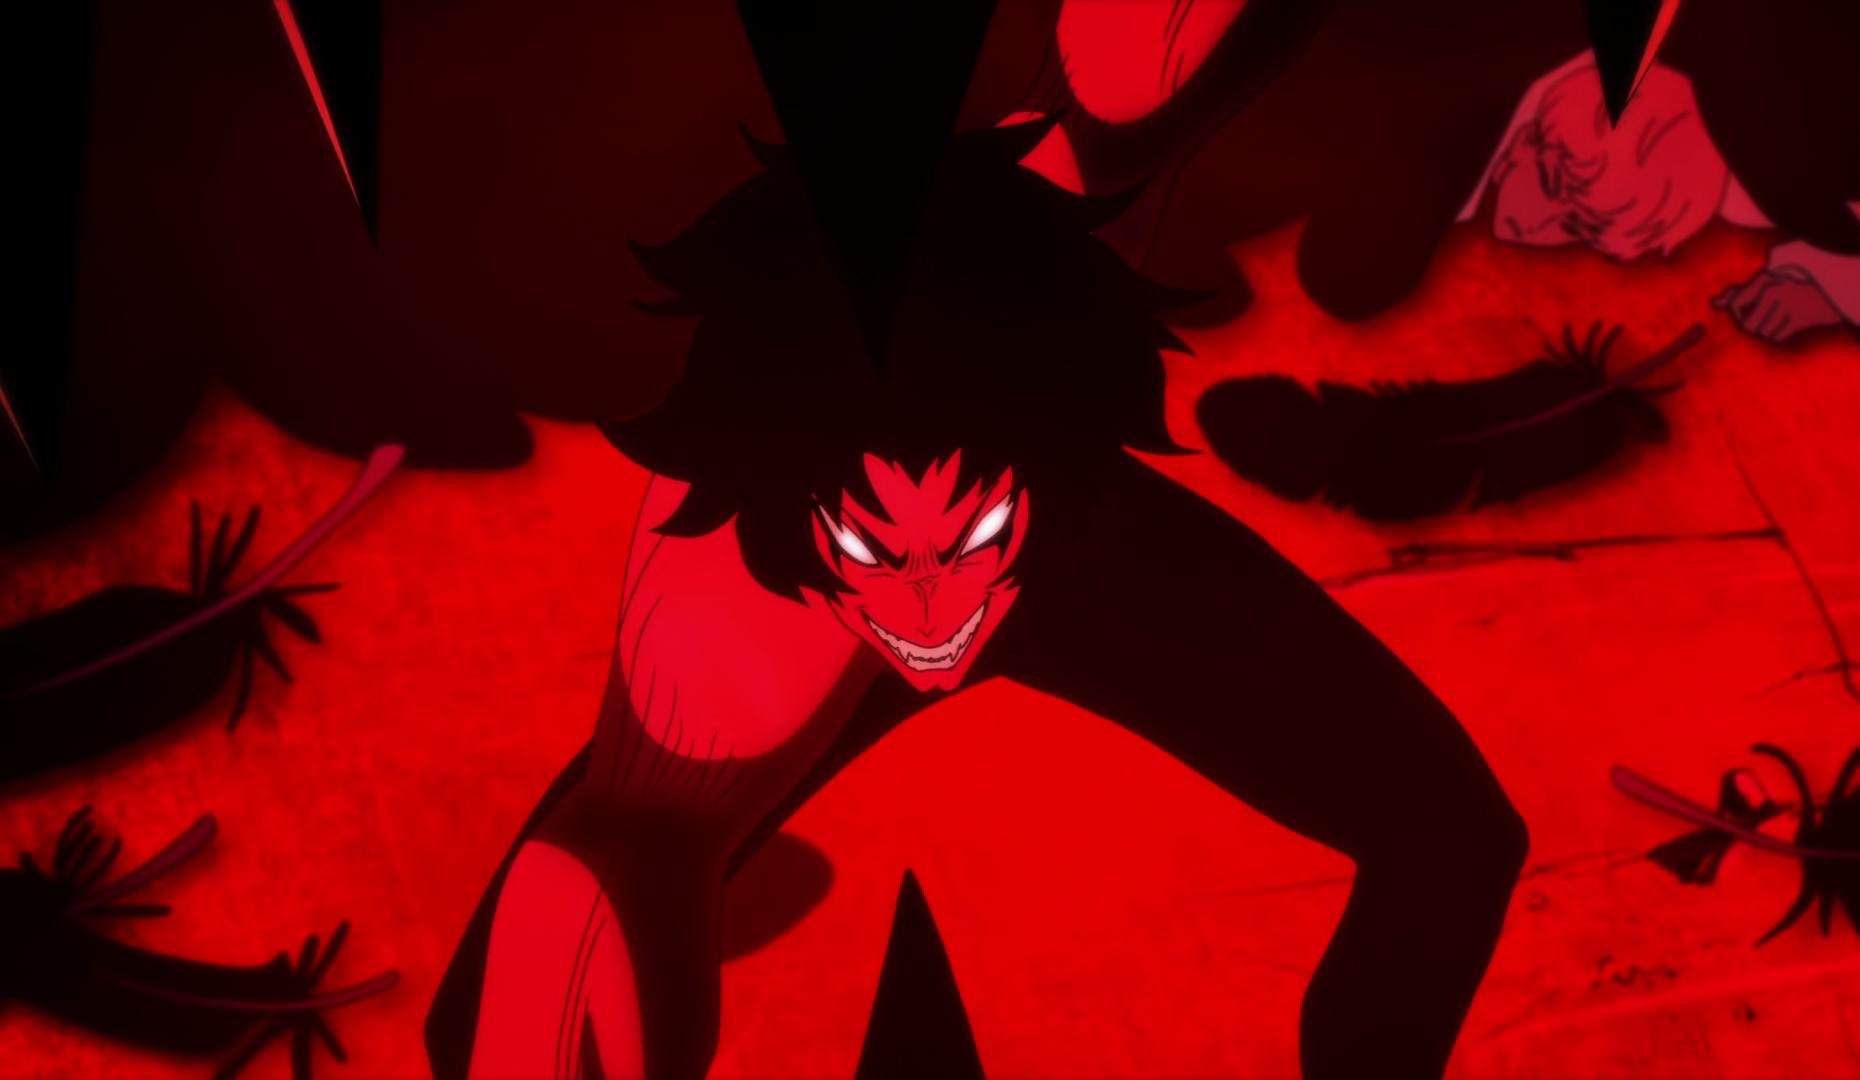 Top 10 Anime Where The Hero Turns Into a Monster - Devilman Crybaby